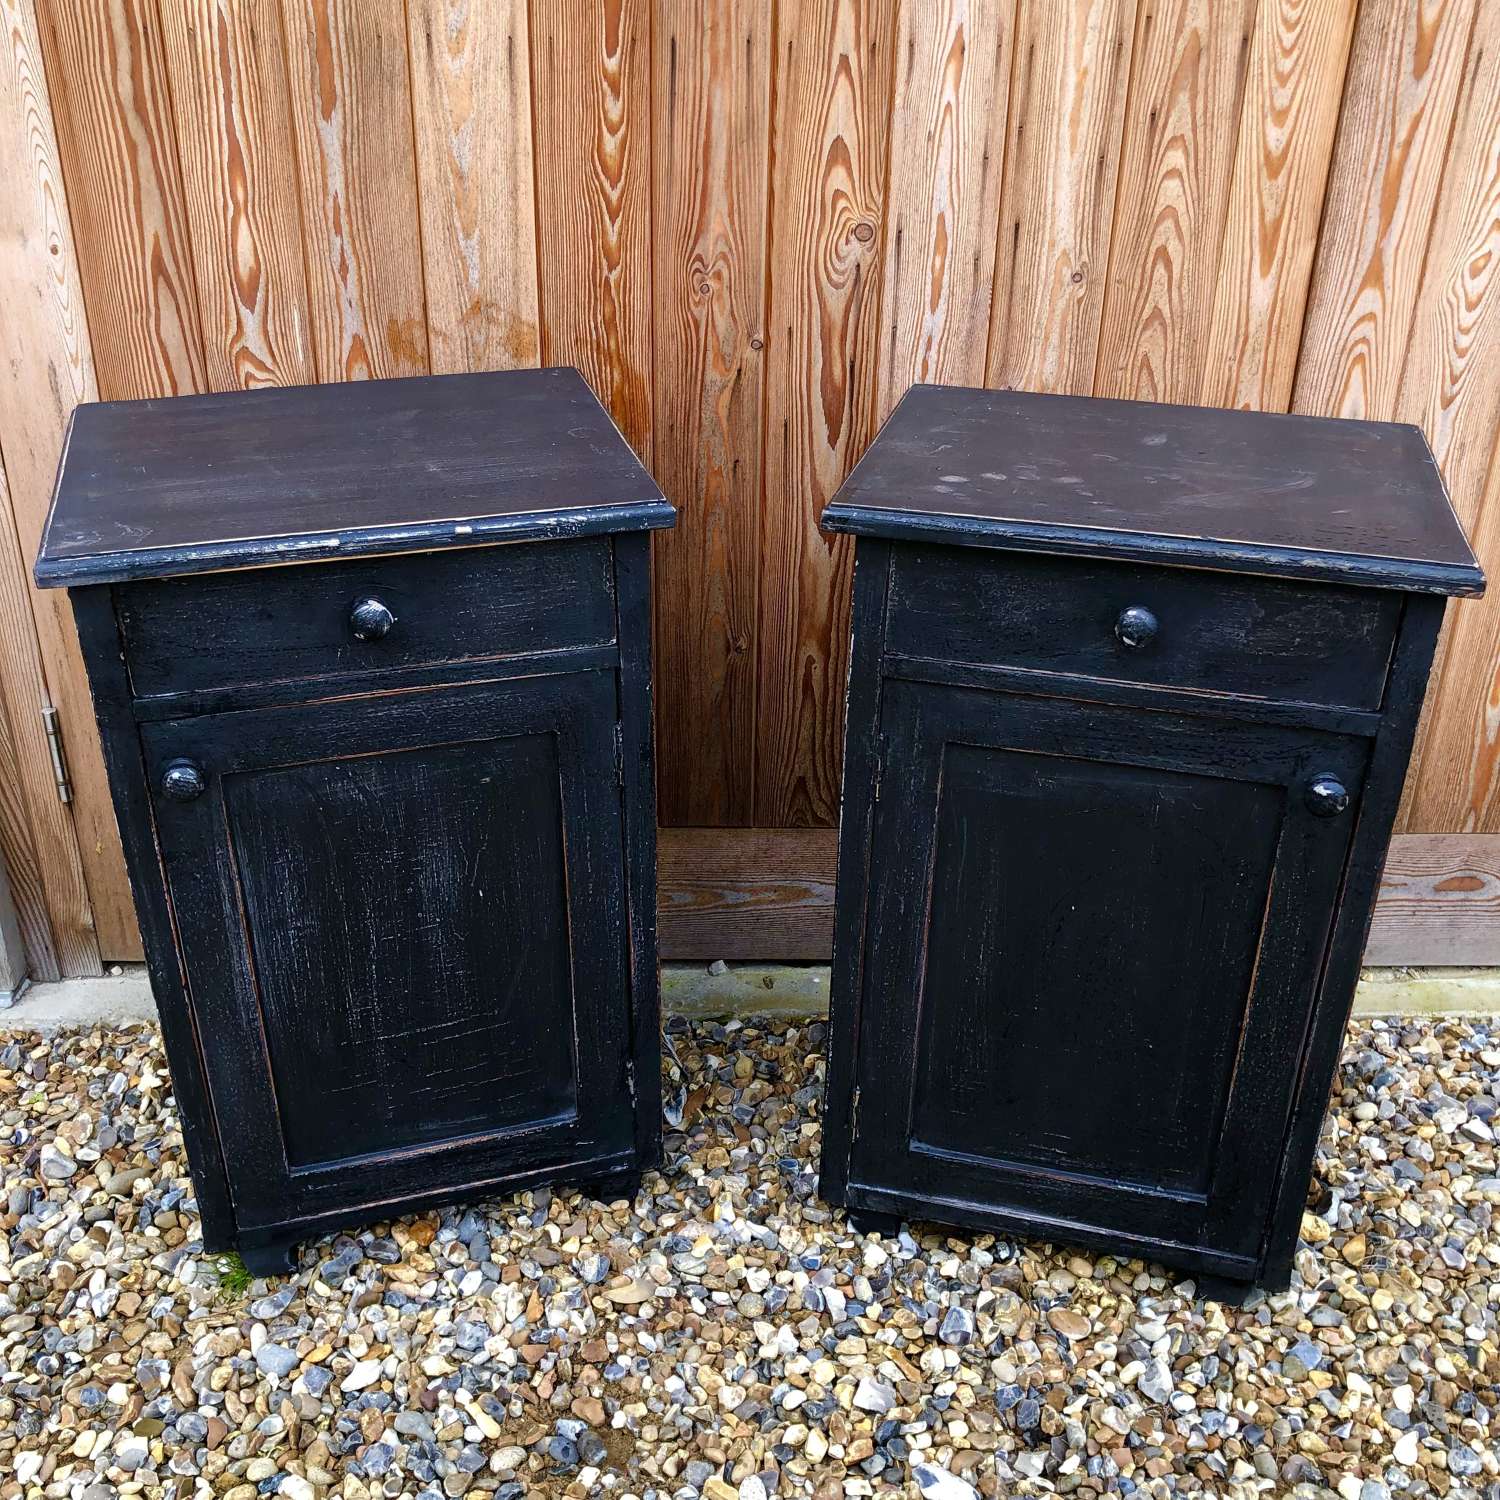 Matching Pair of Vintage Pot or Bedside Cupboards